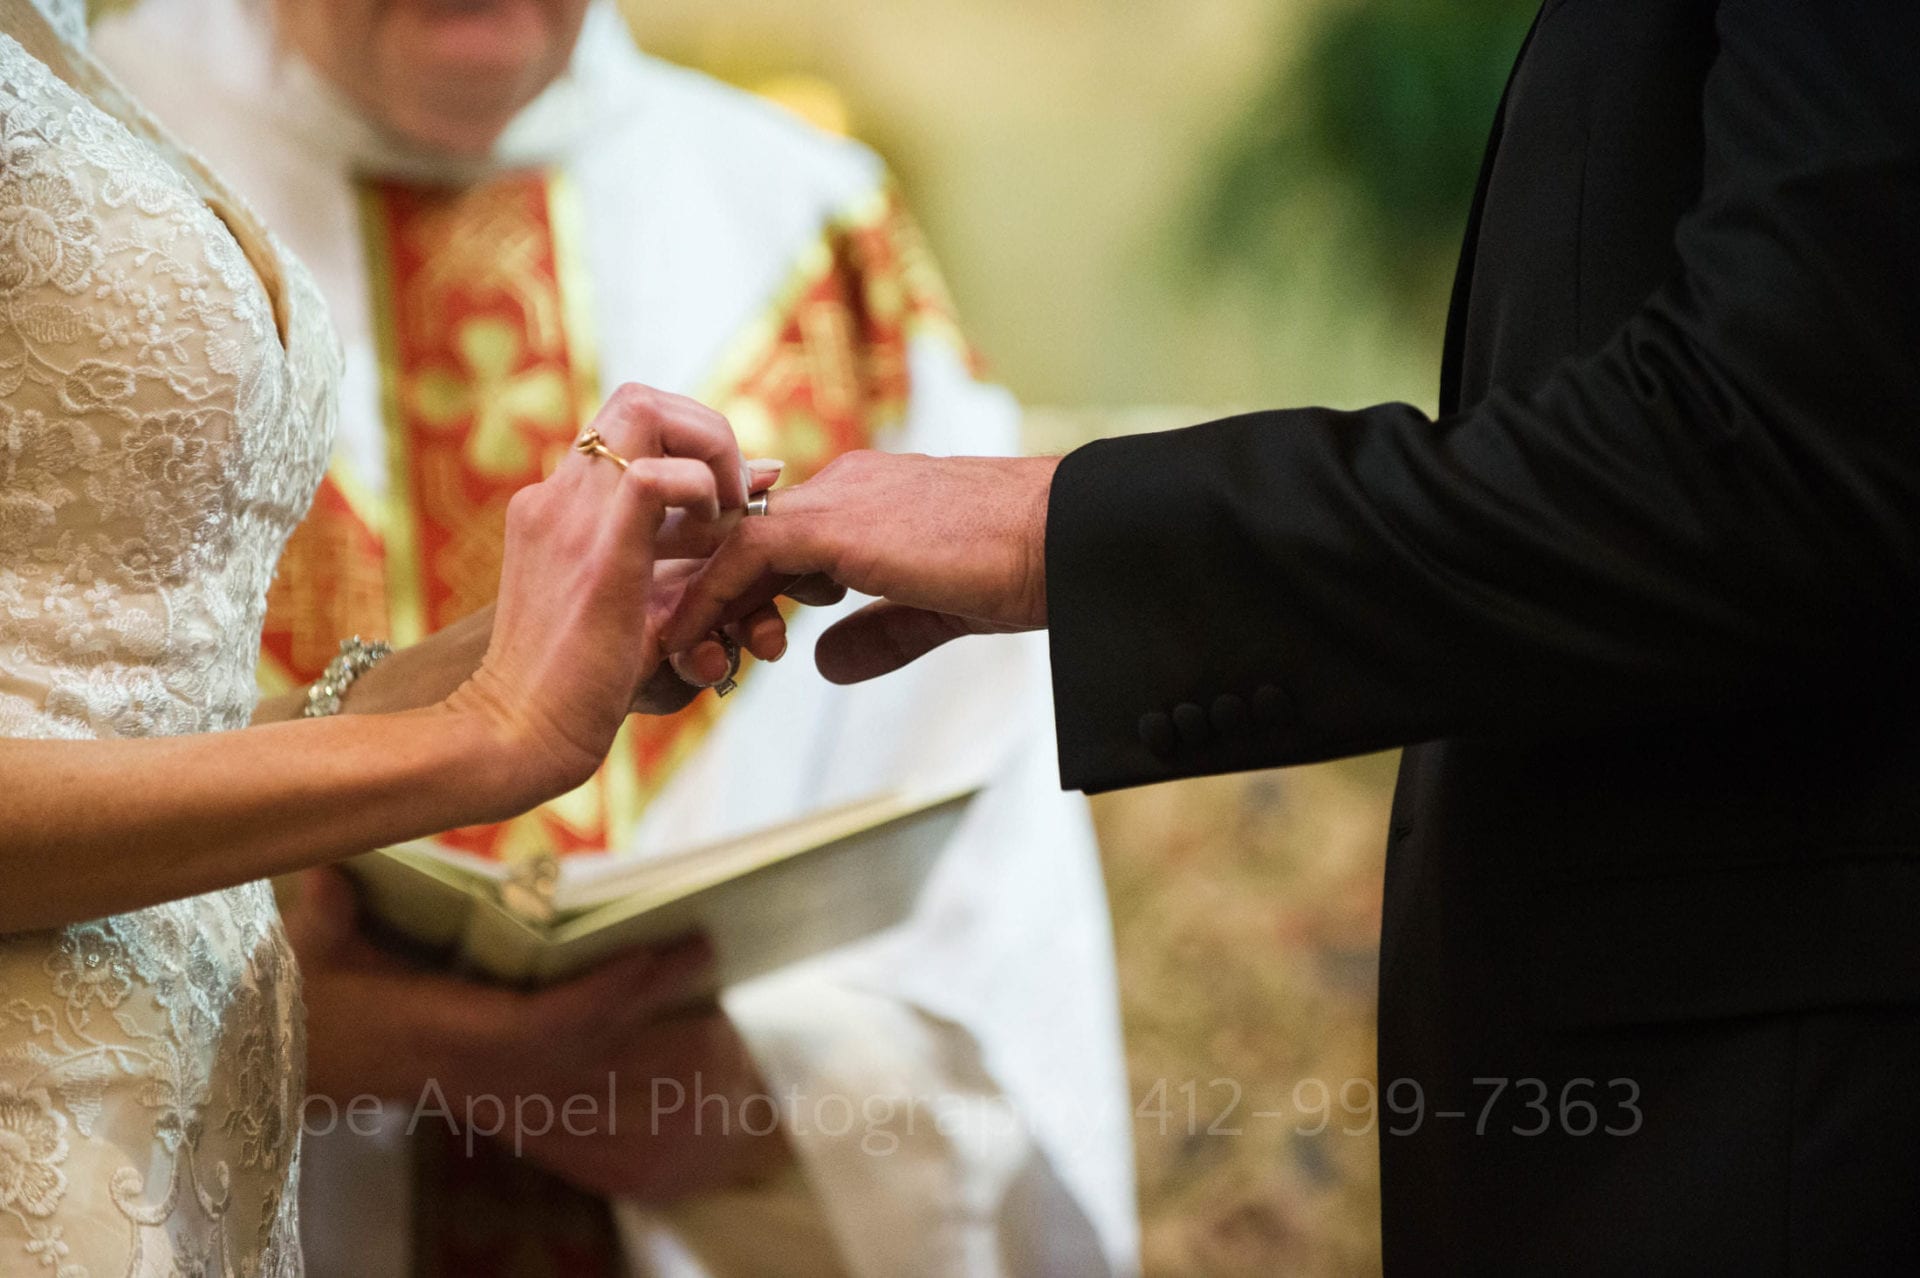 detail of a bride's hands placing a wedding band on her husband's finger.